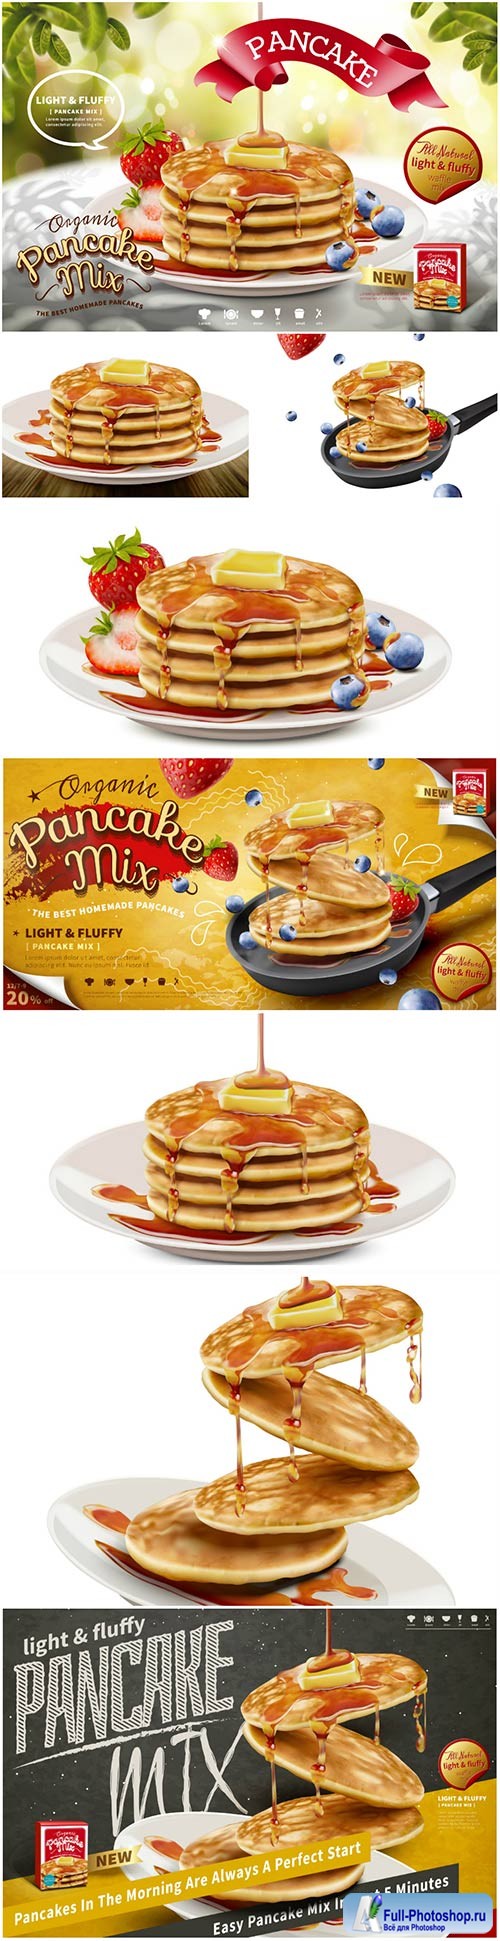 Delicious fluffy pancake ads in 3d vector illustration